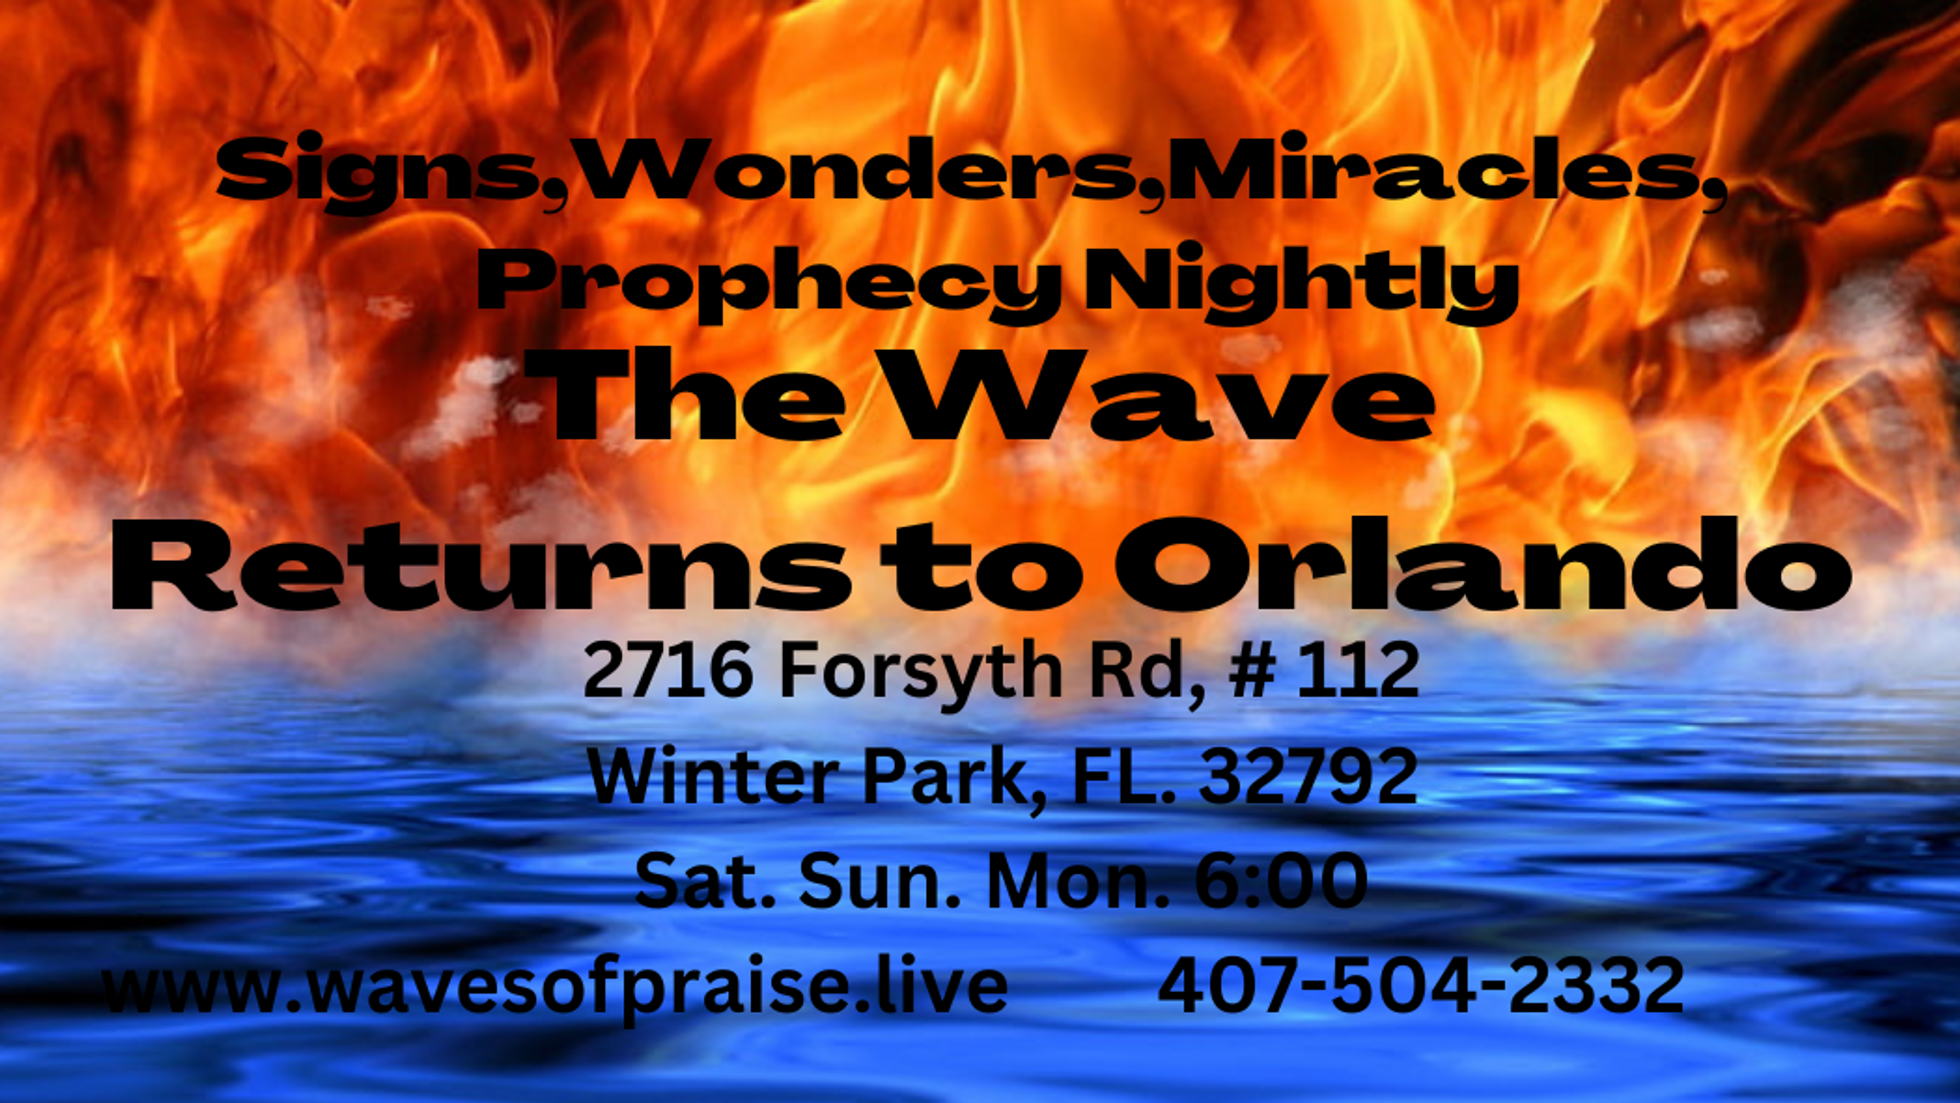 Waves of Praise Live